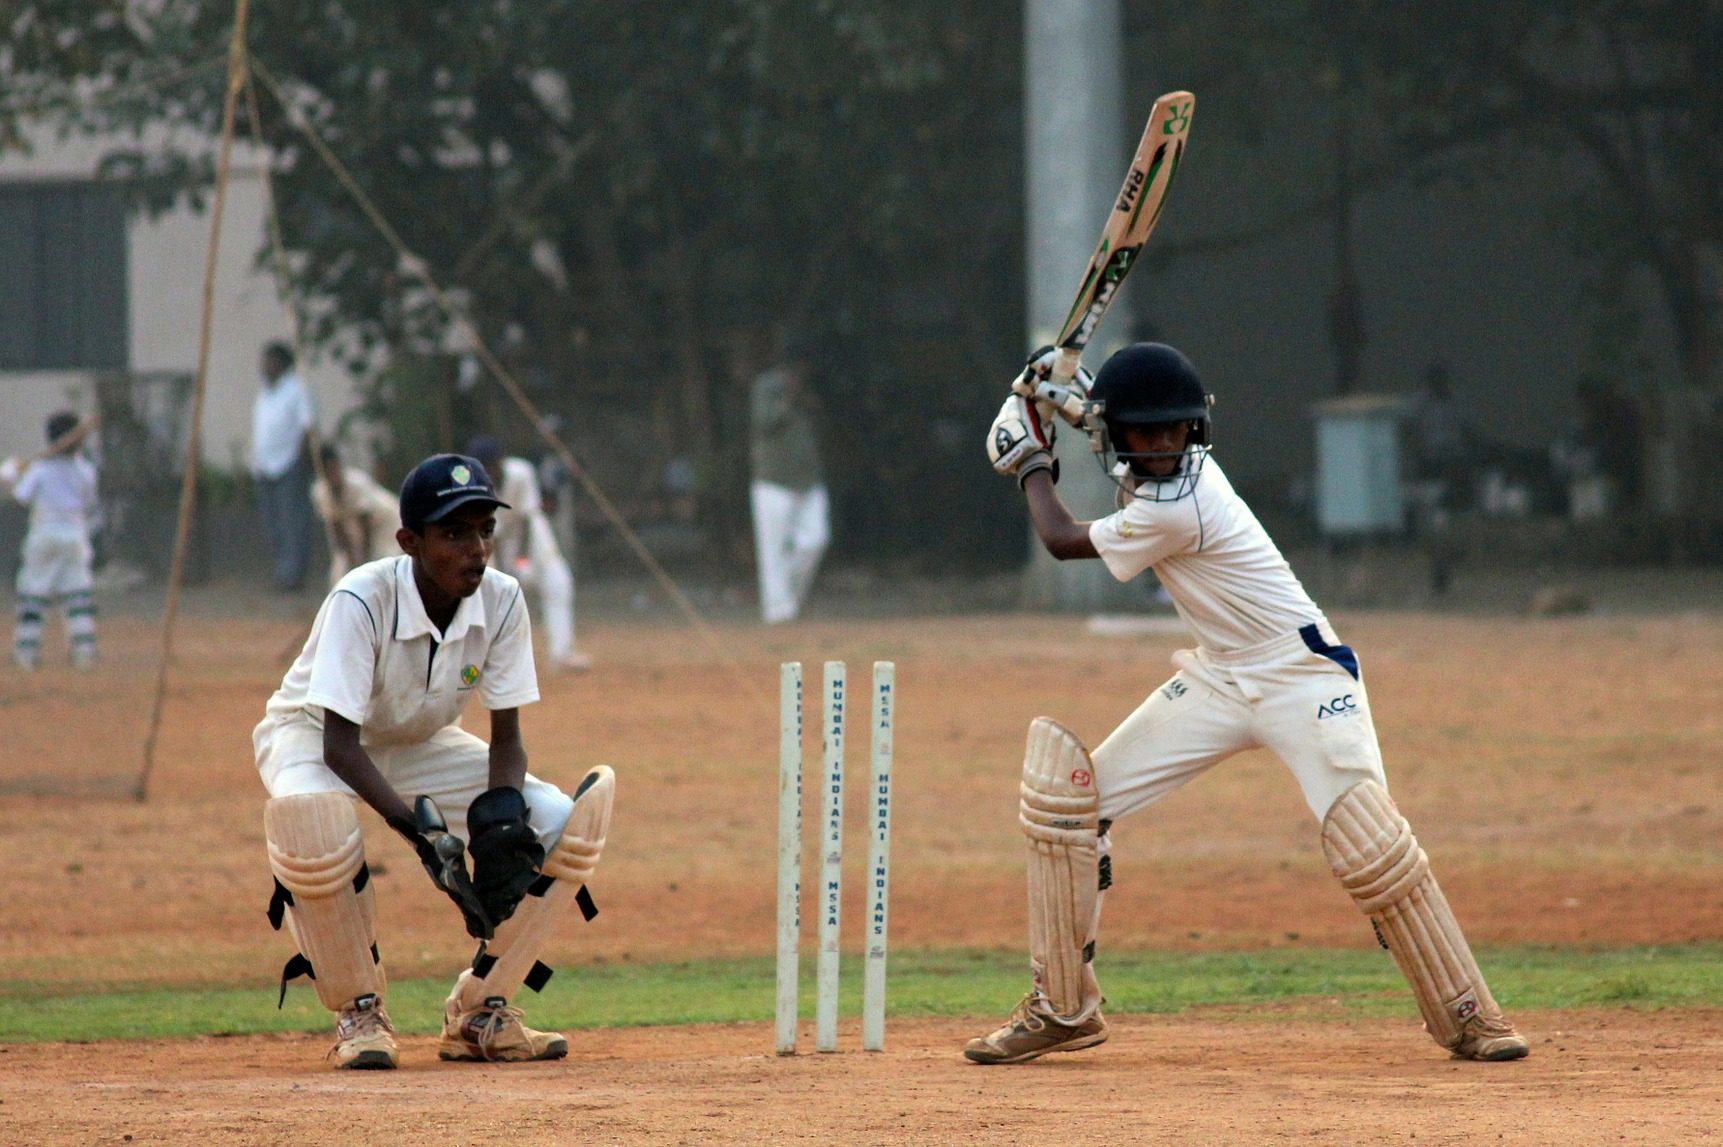 Two people playing cricket, a popular sport in India